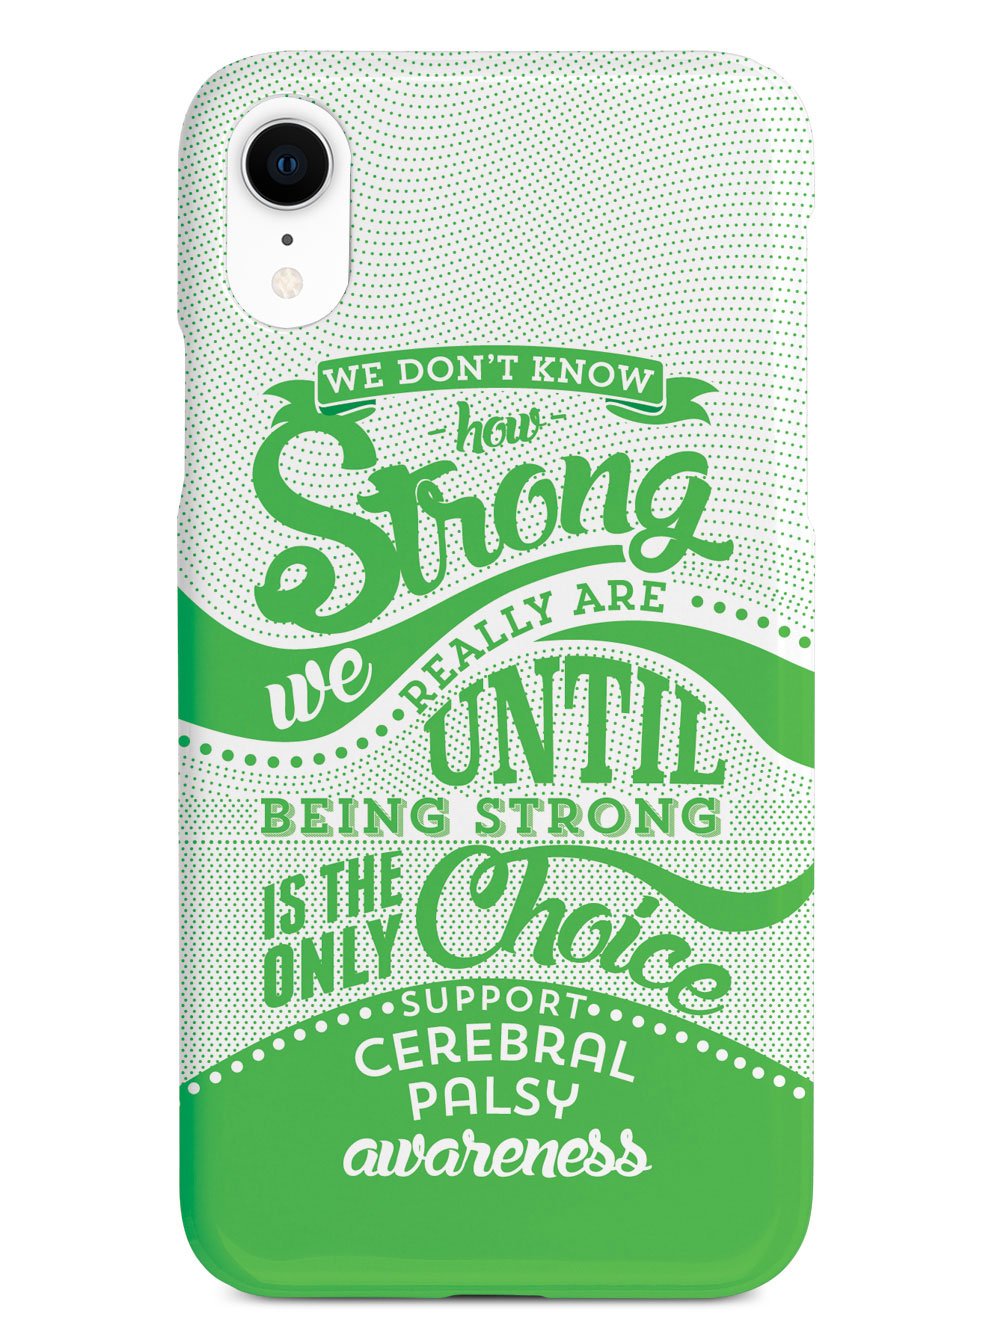 How Strong - Cerebral Palsy Awareness Case